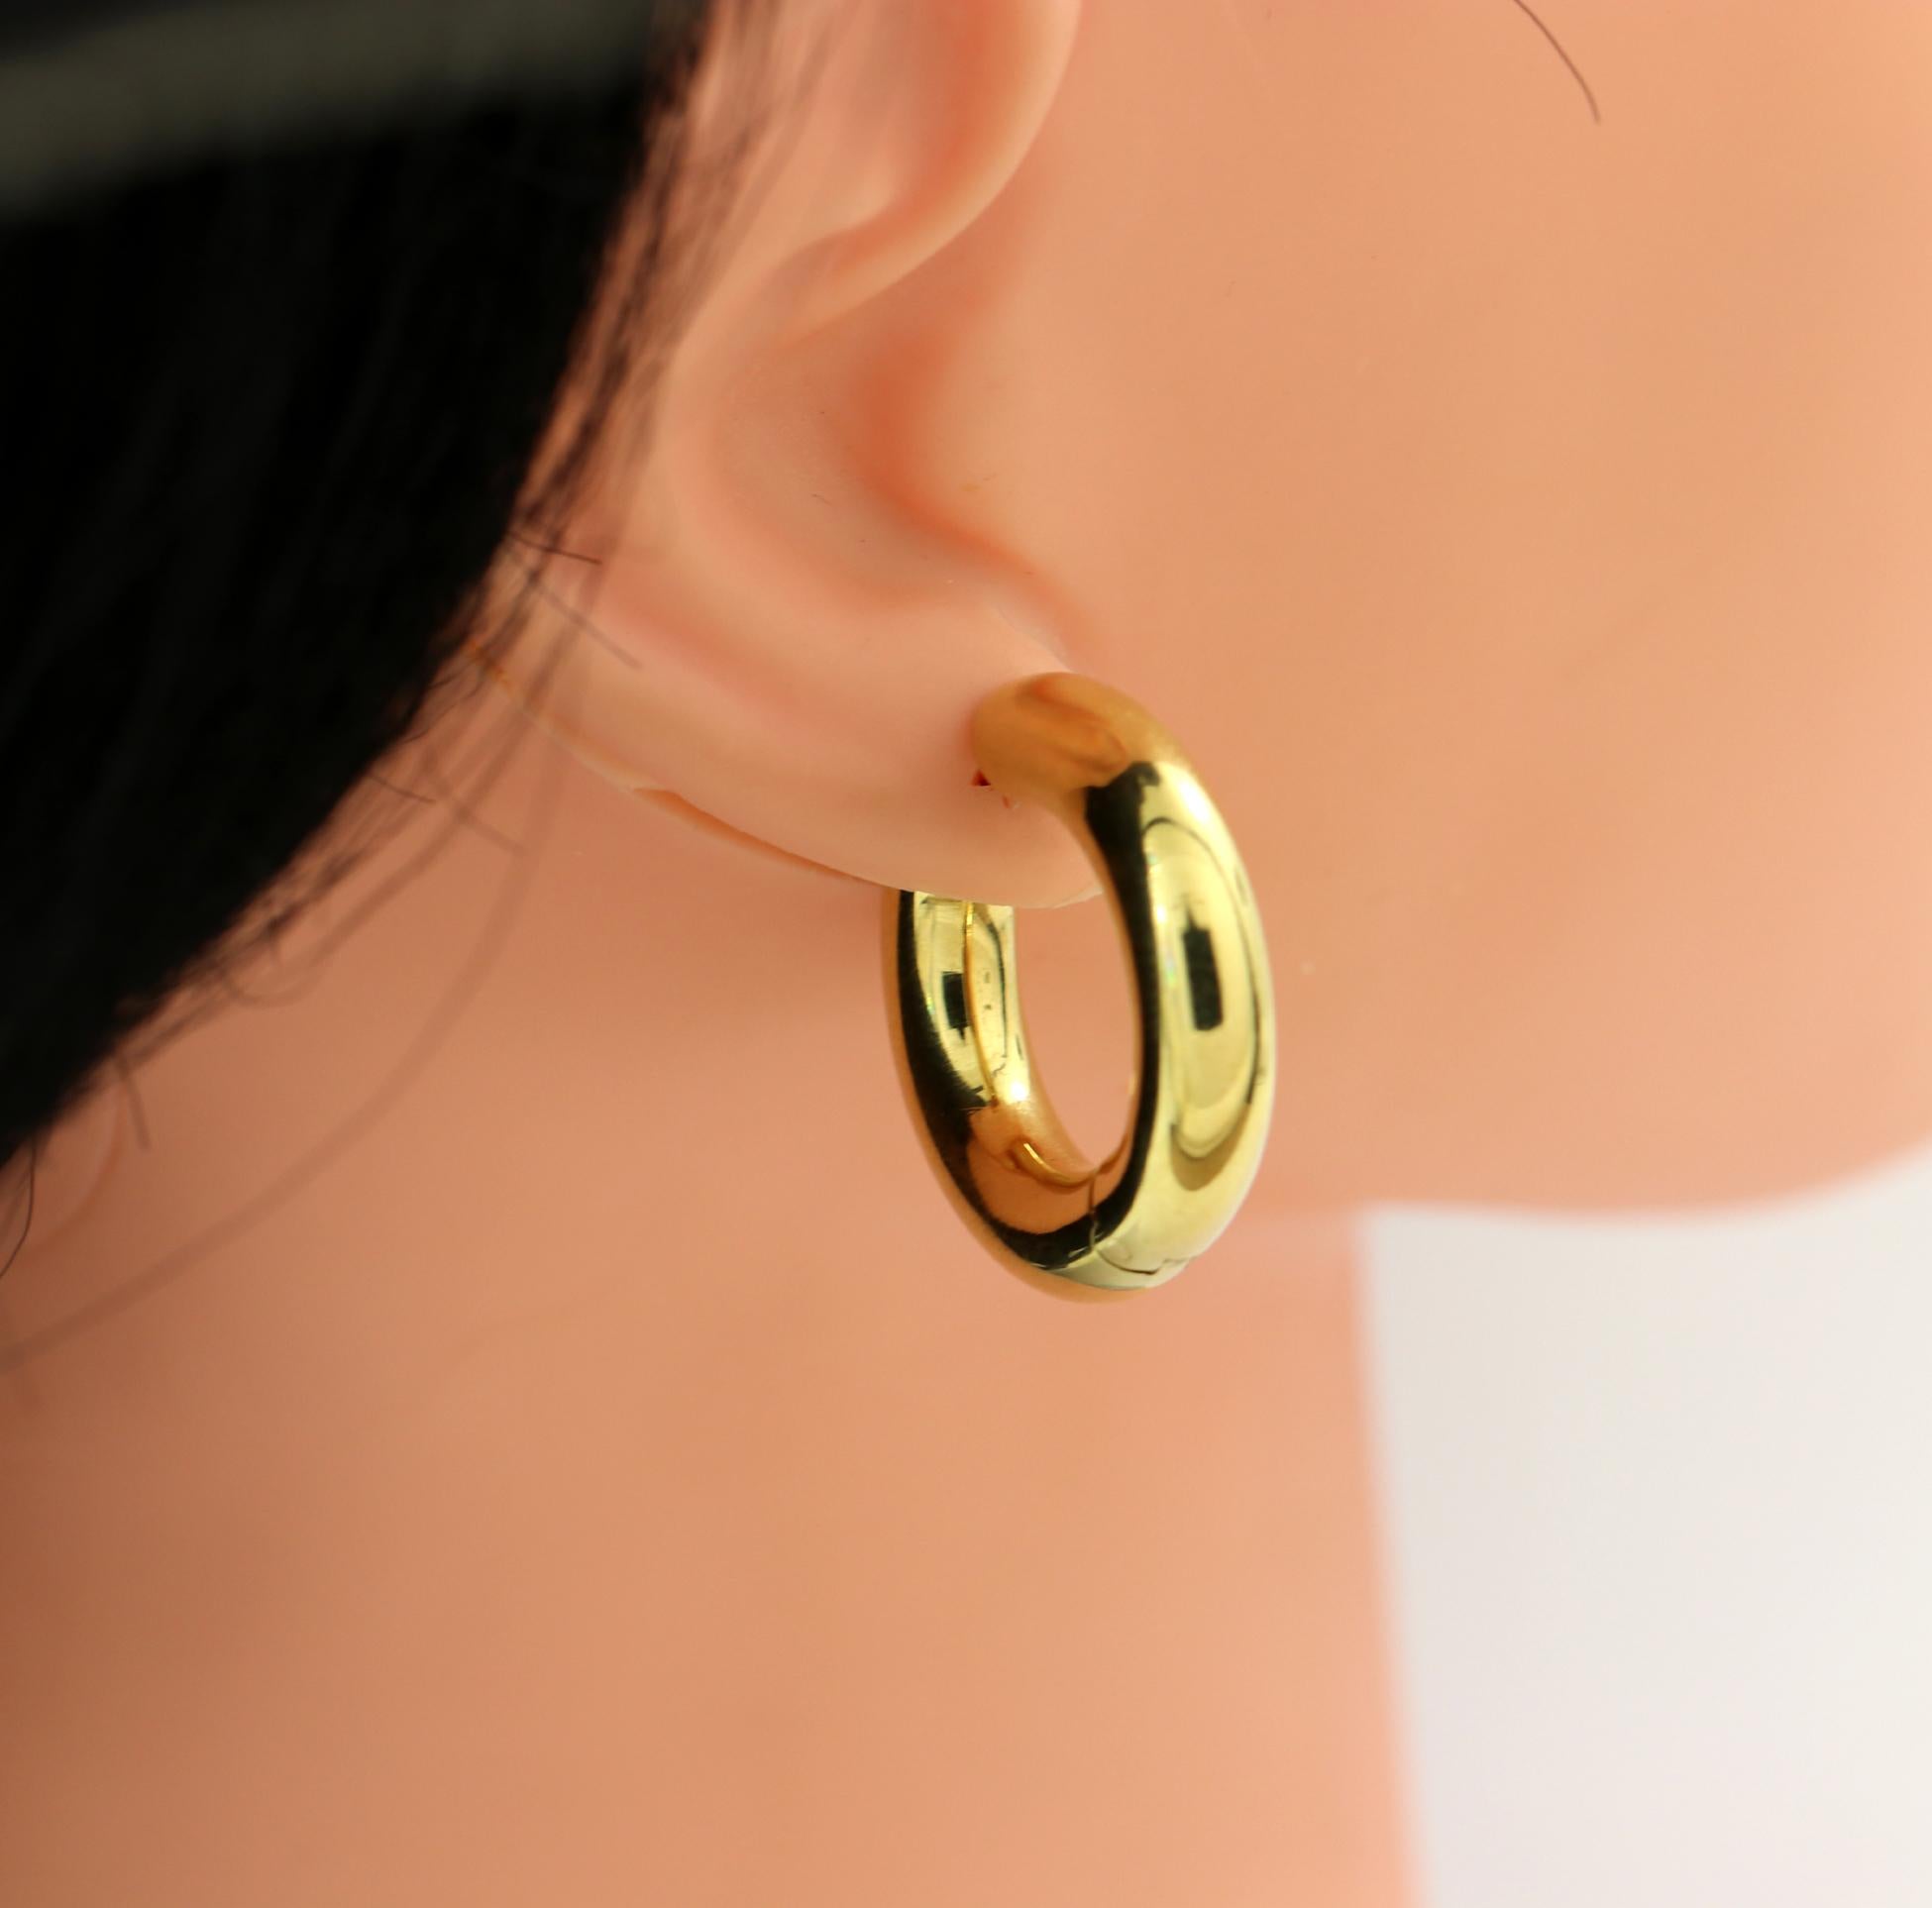 A pair of ladies 18K yellow gold hoop earrings, with an outer thickness of 1/4 inch, and measuring a little over an inch in diameter. Marked Tiffany & Co. Italy, and 750. The walls are thick allowing for strong construction while being a hollow